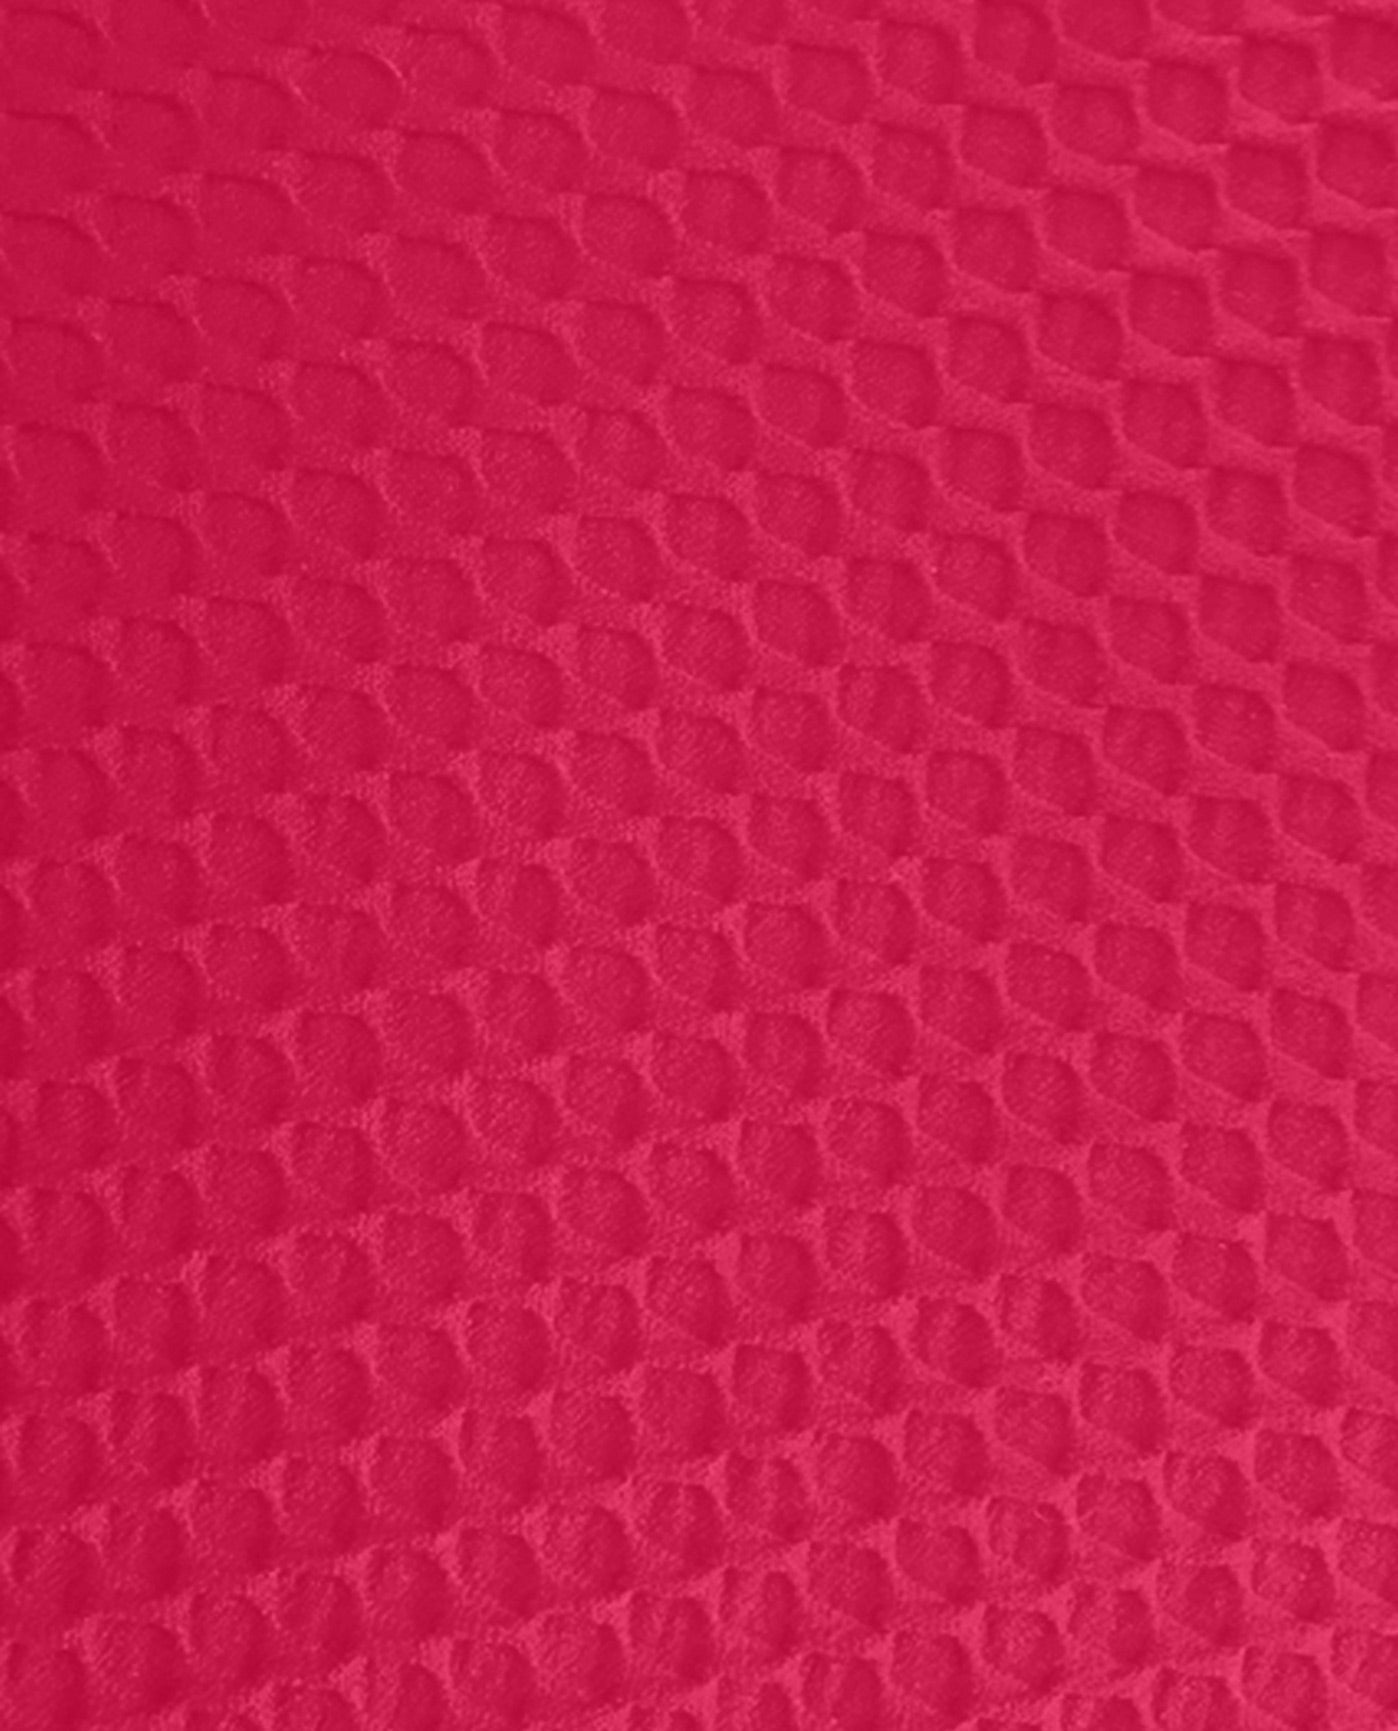 FABRIC SWATCH VIEW OF CHLORINE RESISTANT AQUAMORE SOLID TEXTURED SCOOP NECK PLUS SIZE SWIMSUIT | 511 AQT TEXTURED RASPBERRY